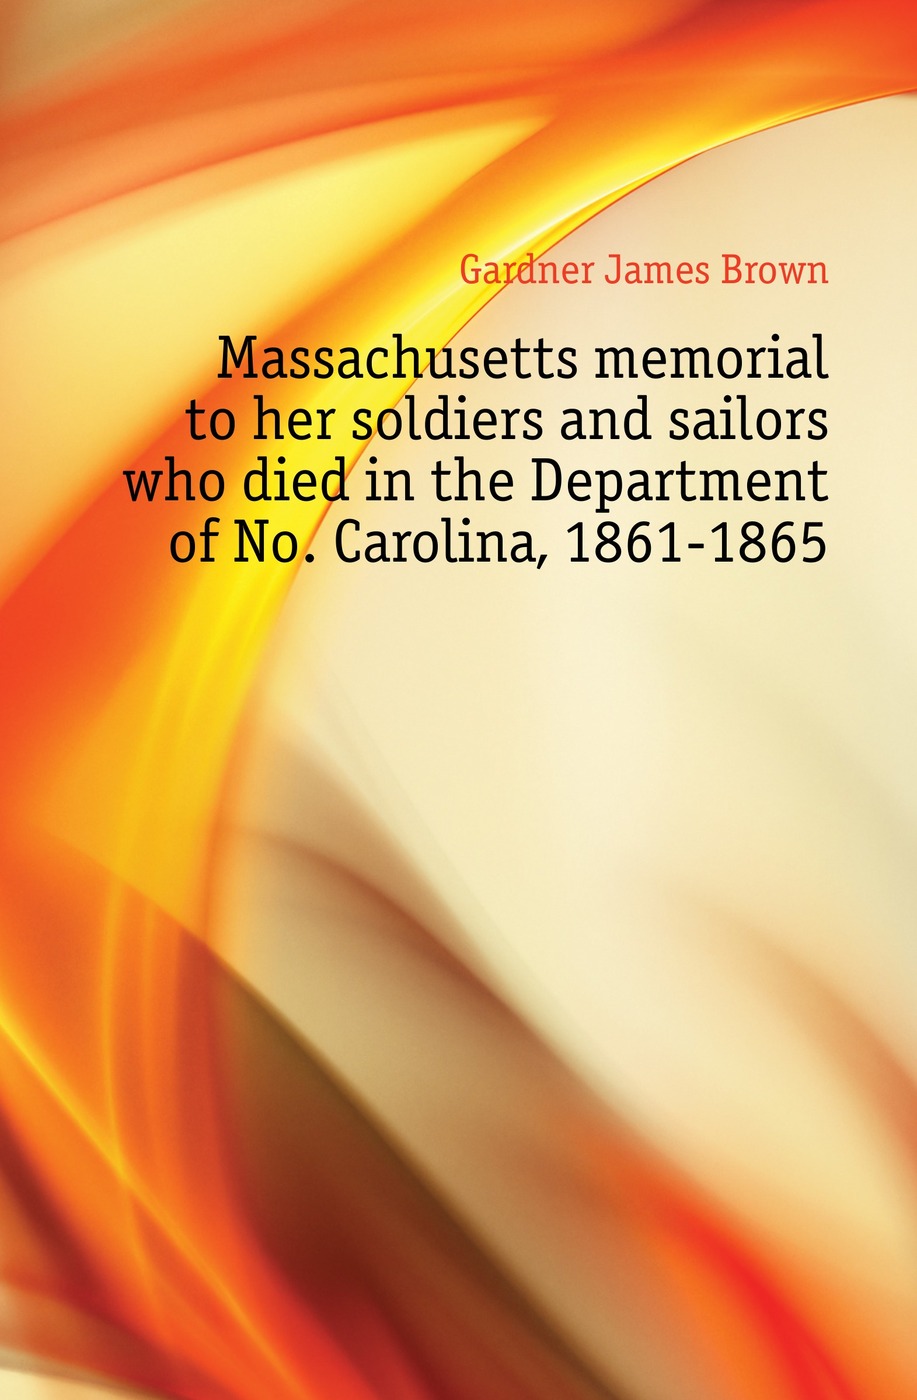 Massachusetts memorial to her soldiers and sailors who died in the Department of No. Carolina, 1861-1865